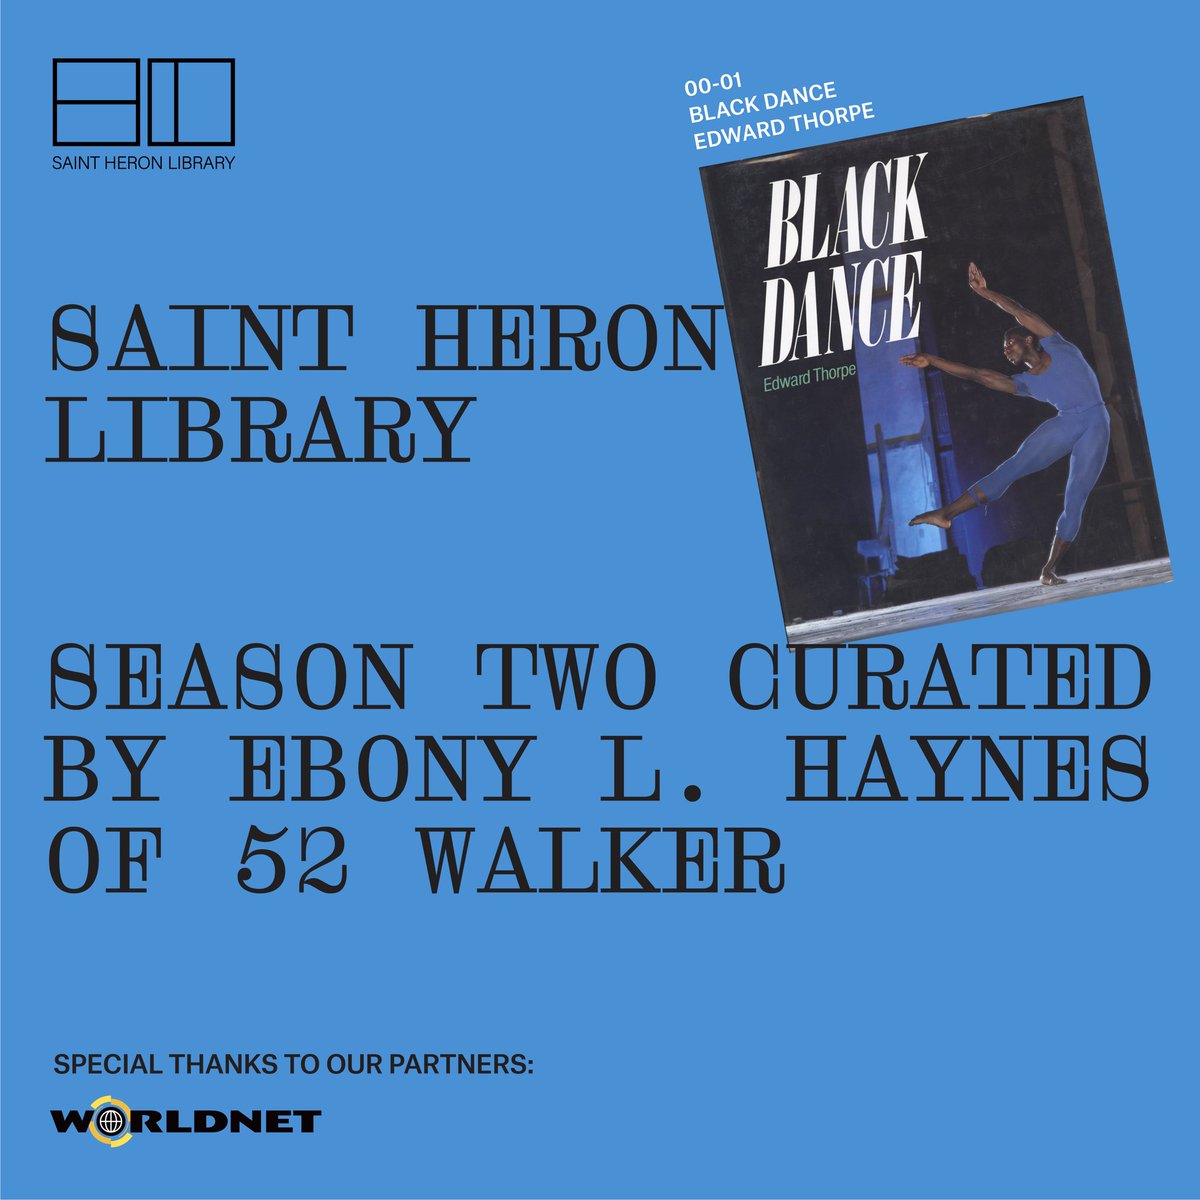 We are pleased to present the Season Two collection of our Saint Heron Library, curated by Director of 52 Walker, Ebony L. Haynes. Books will be available to borrow November 21st at 9am PT / 12pm ET. Browse the full collection via SAINTHERON.COM.